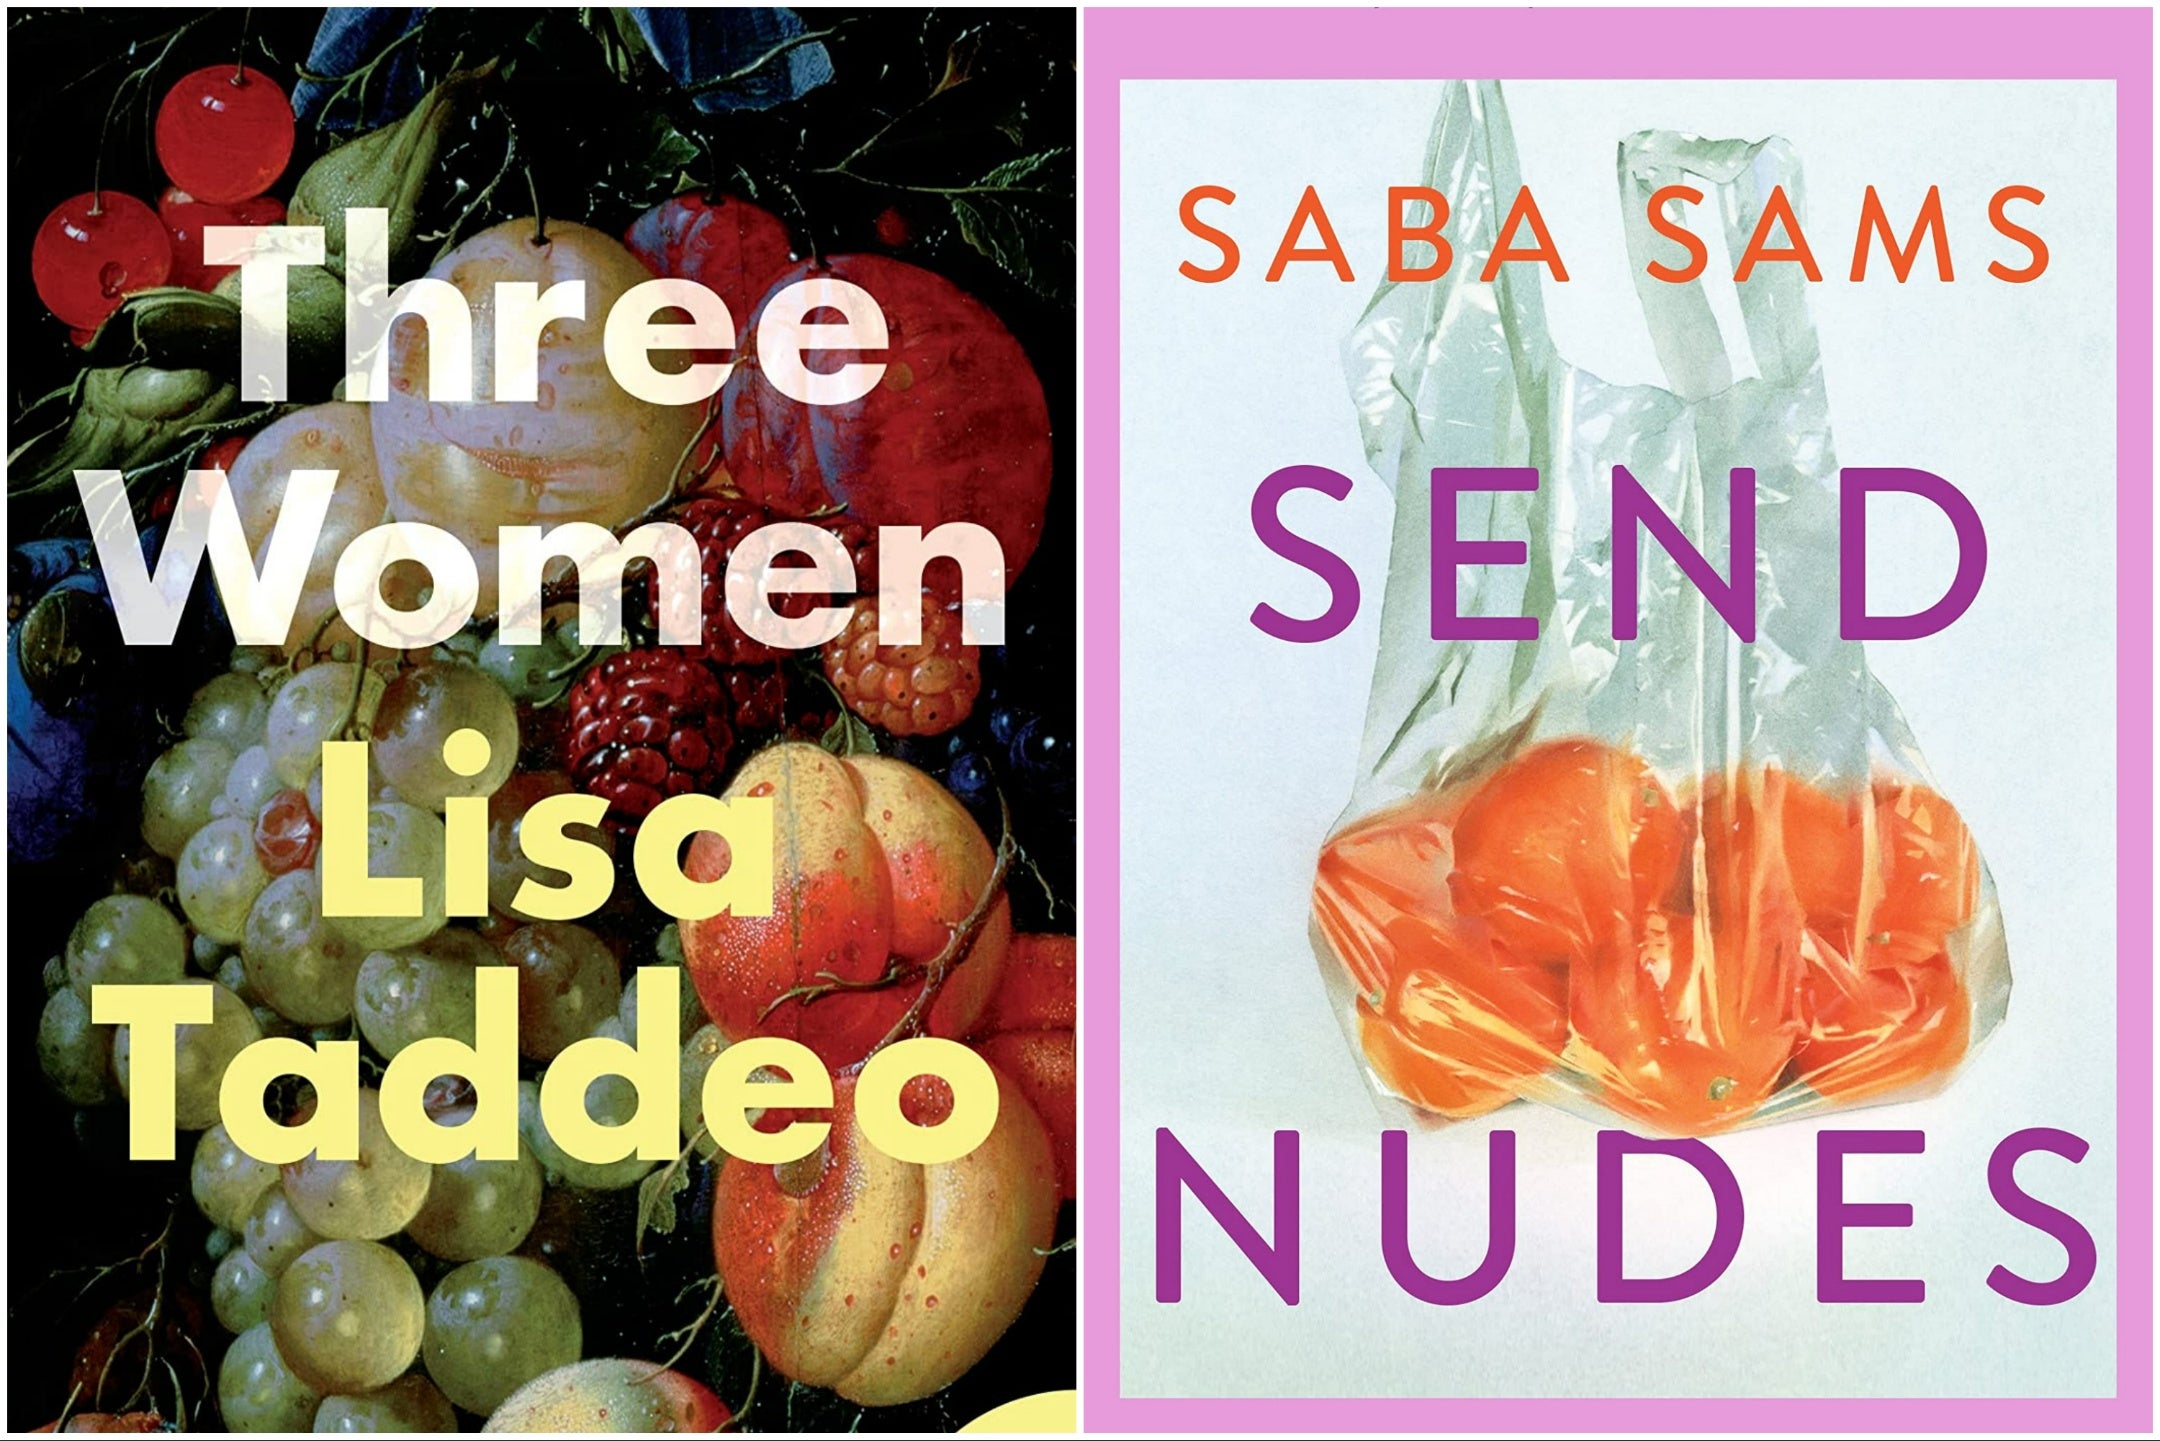 Lisa Taddeo and Saba Sams are two authors who have shed light on female desire